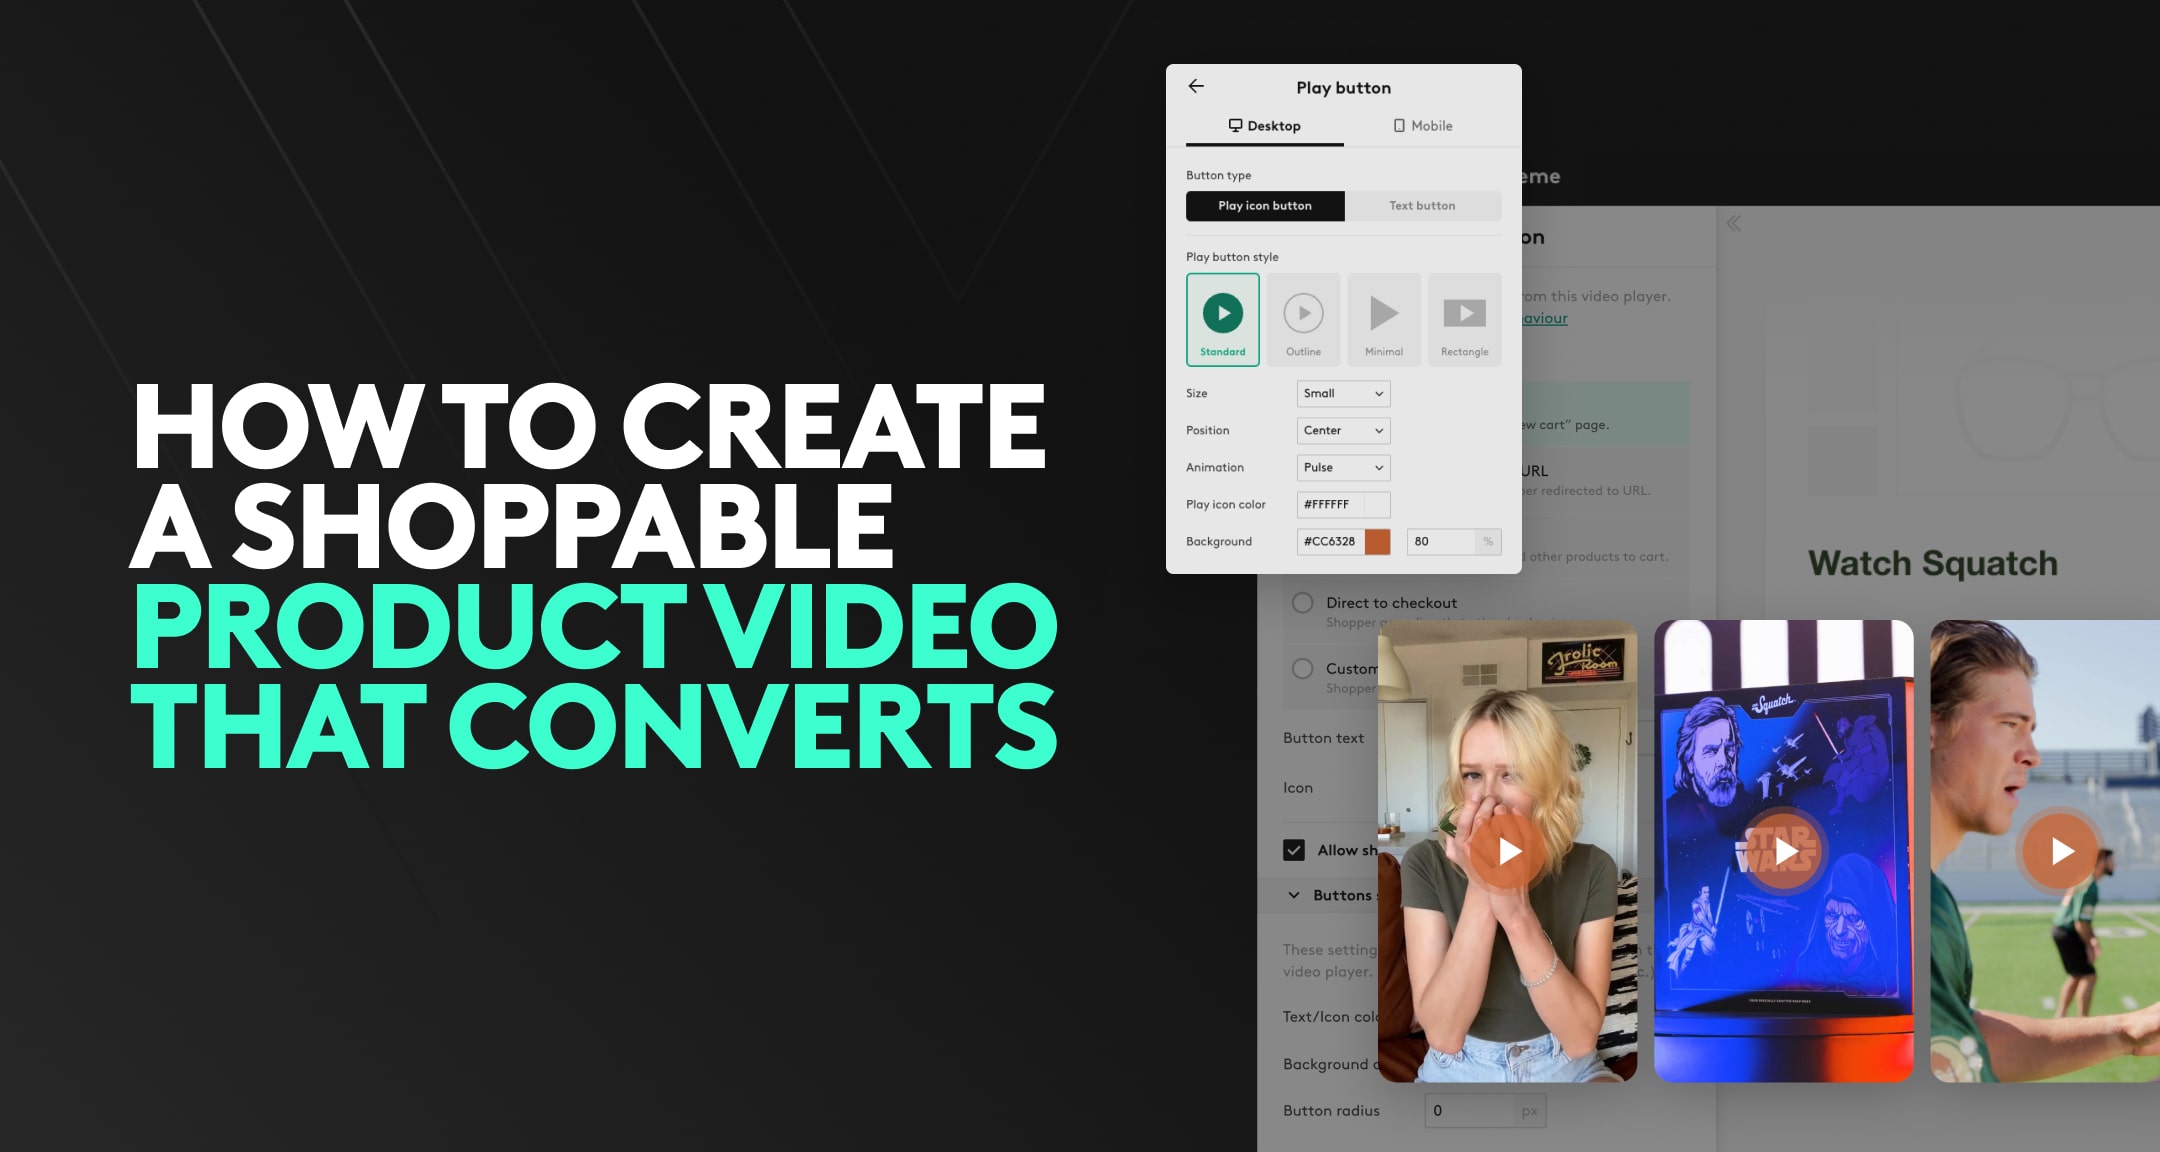 How to Create a Shoppable Product Video That Converts